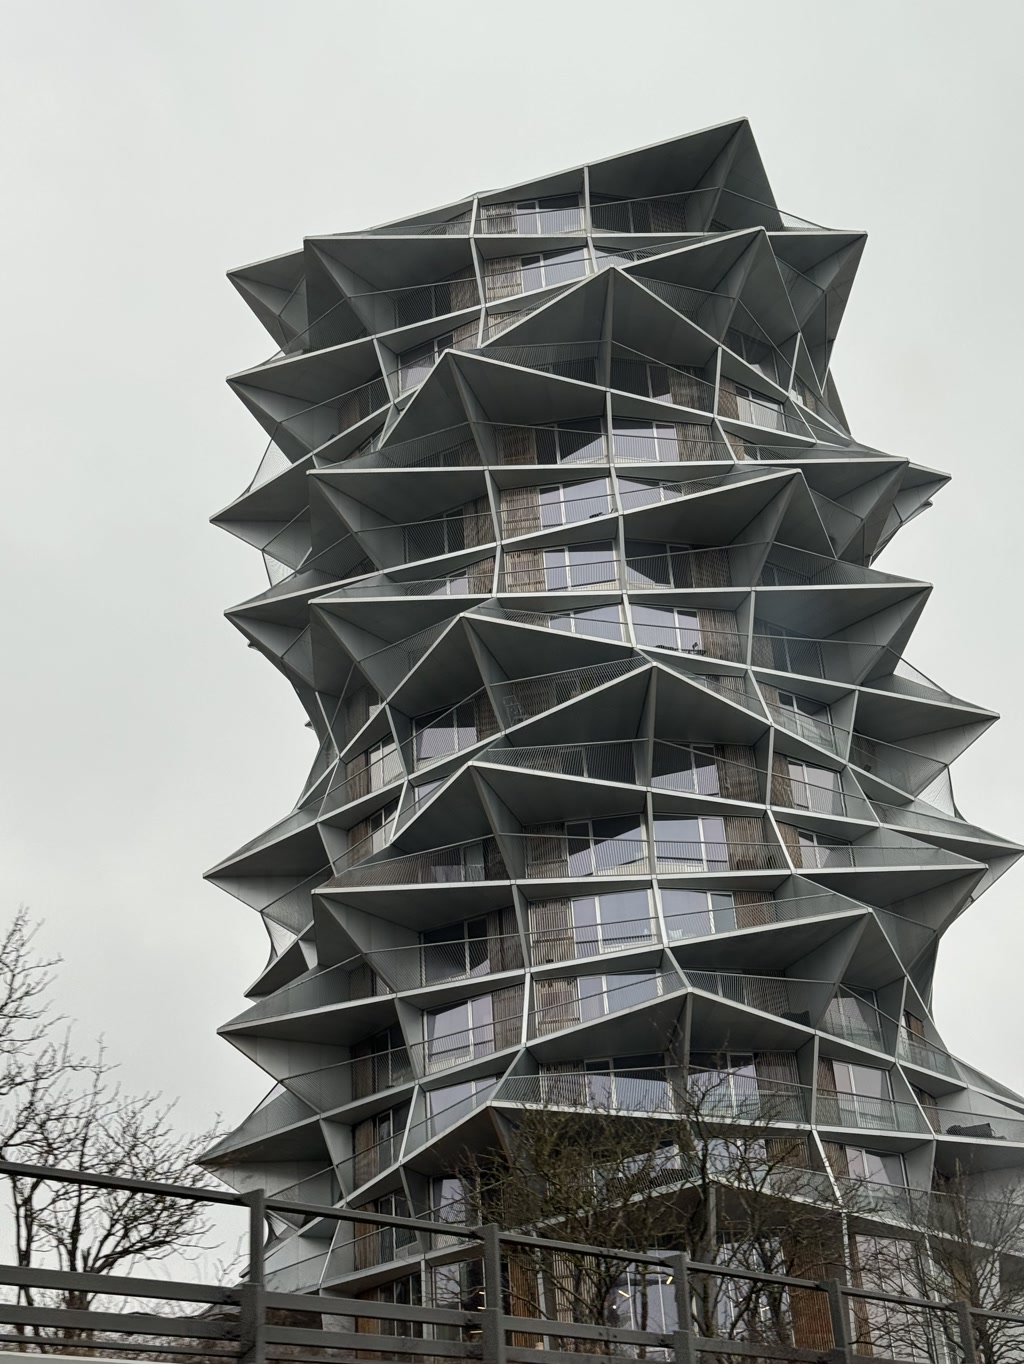 A modern multi-story building displaying a distinctive architectural design with a series of repeating geometric shapes that appear to be stackable modules. Each module consists of a star-like shape with protruding corners, creating a sense of depth and dynamic form. The facade is dominated by gray hues, with balconies enclosed by metal railings that complement the avant-garde structure. The sky is overcast, and no people are visible in the view, which also includes a glimpse of a wooden fence and bare tree branches in the foreground.